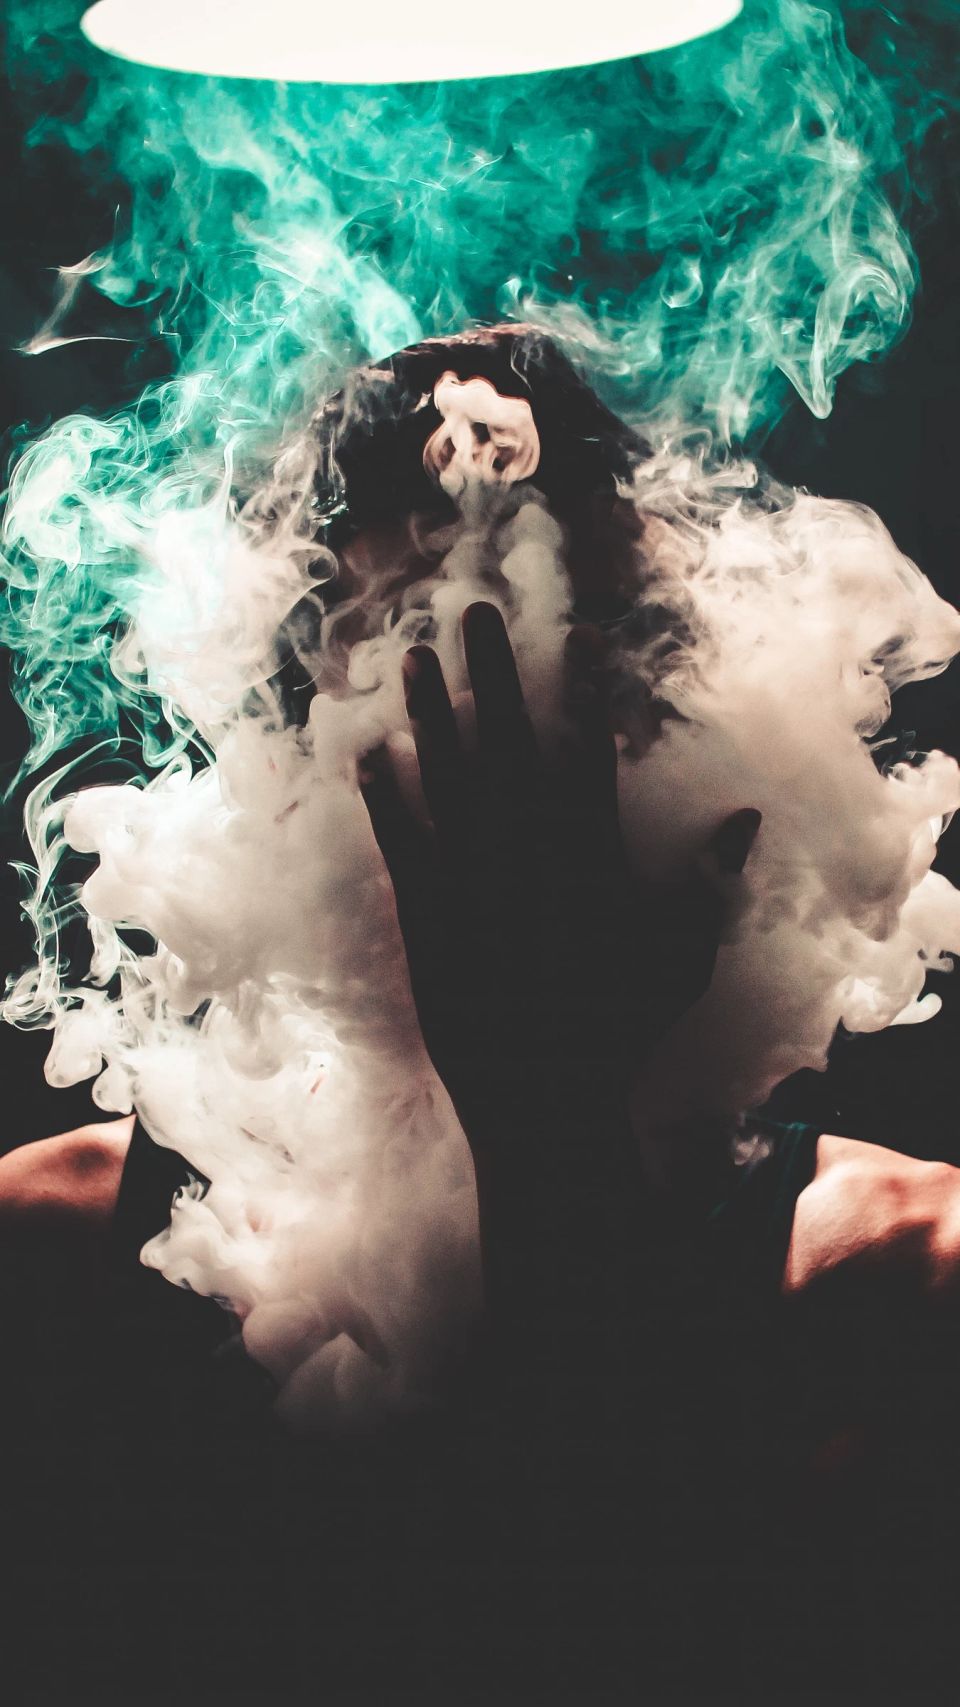 Silhouette of person creating smoke cloud with overhead light